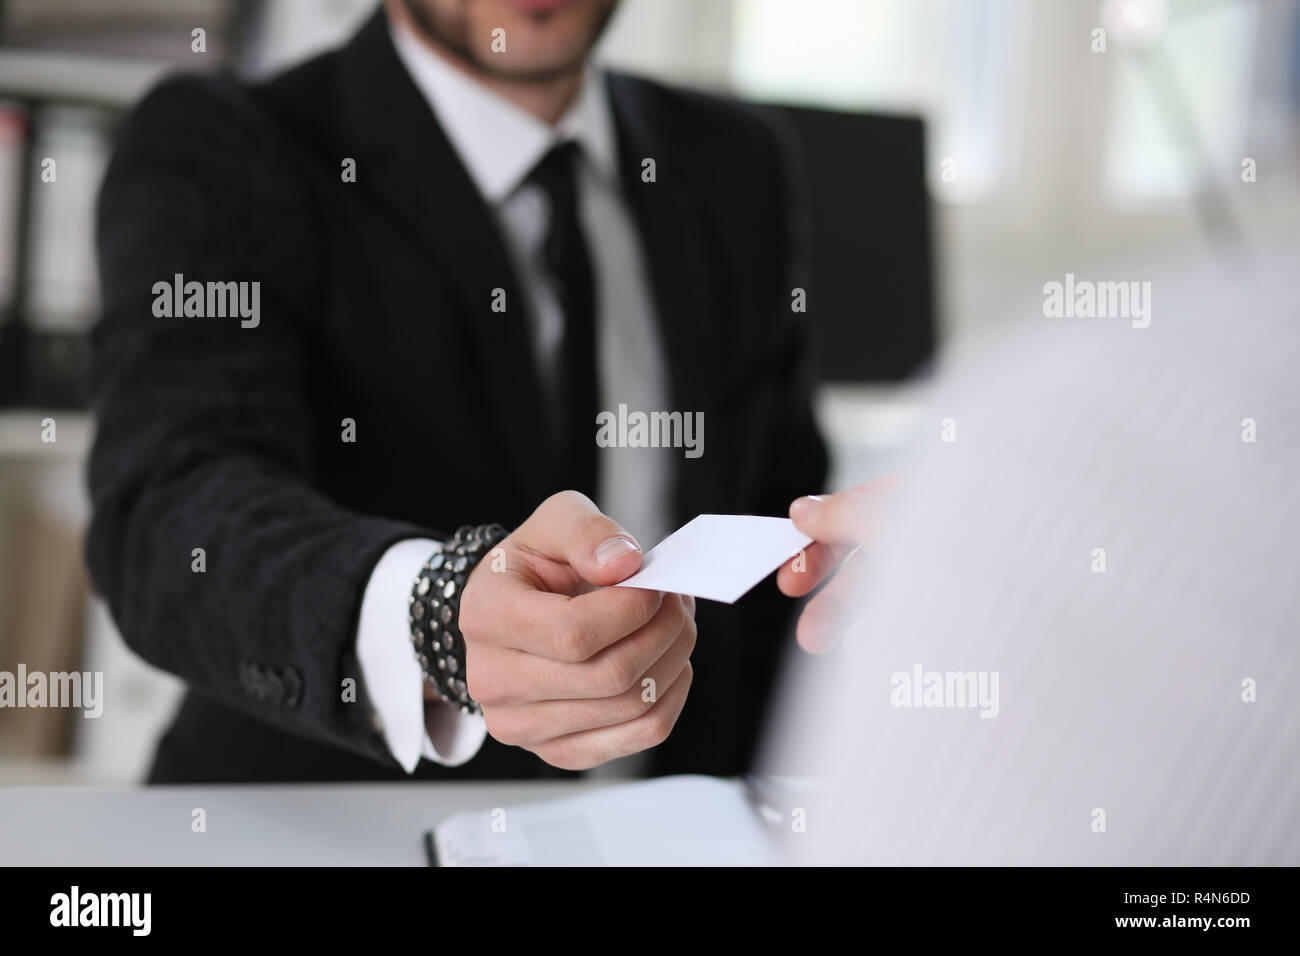 man give businesscard in office Stock Photo